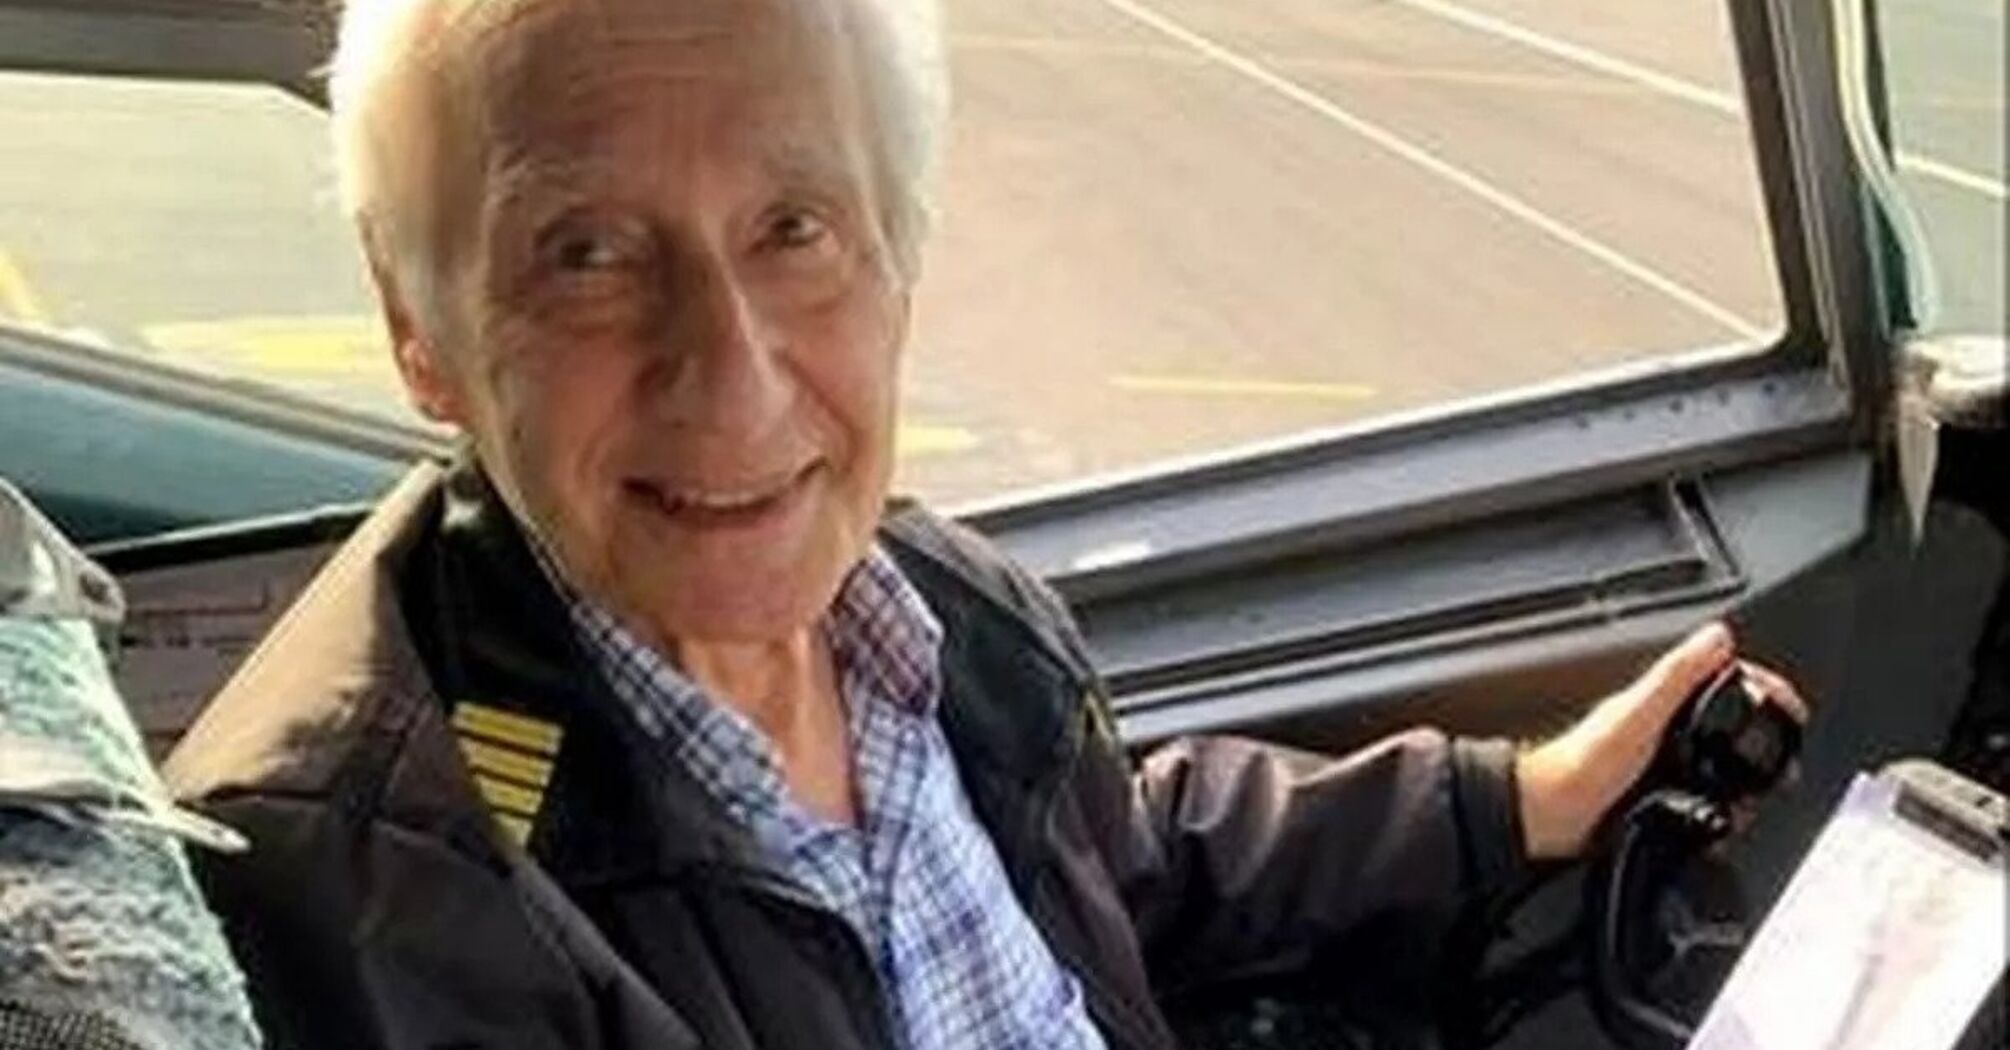 Former Royal Air Force pilot who never got to fly finally takes to the skies